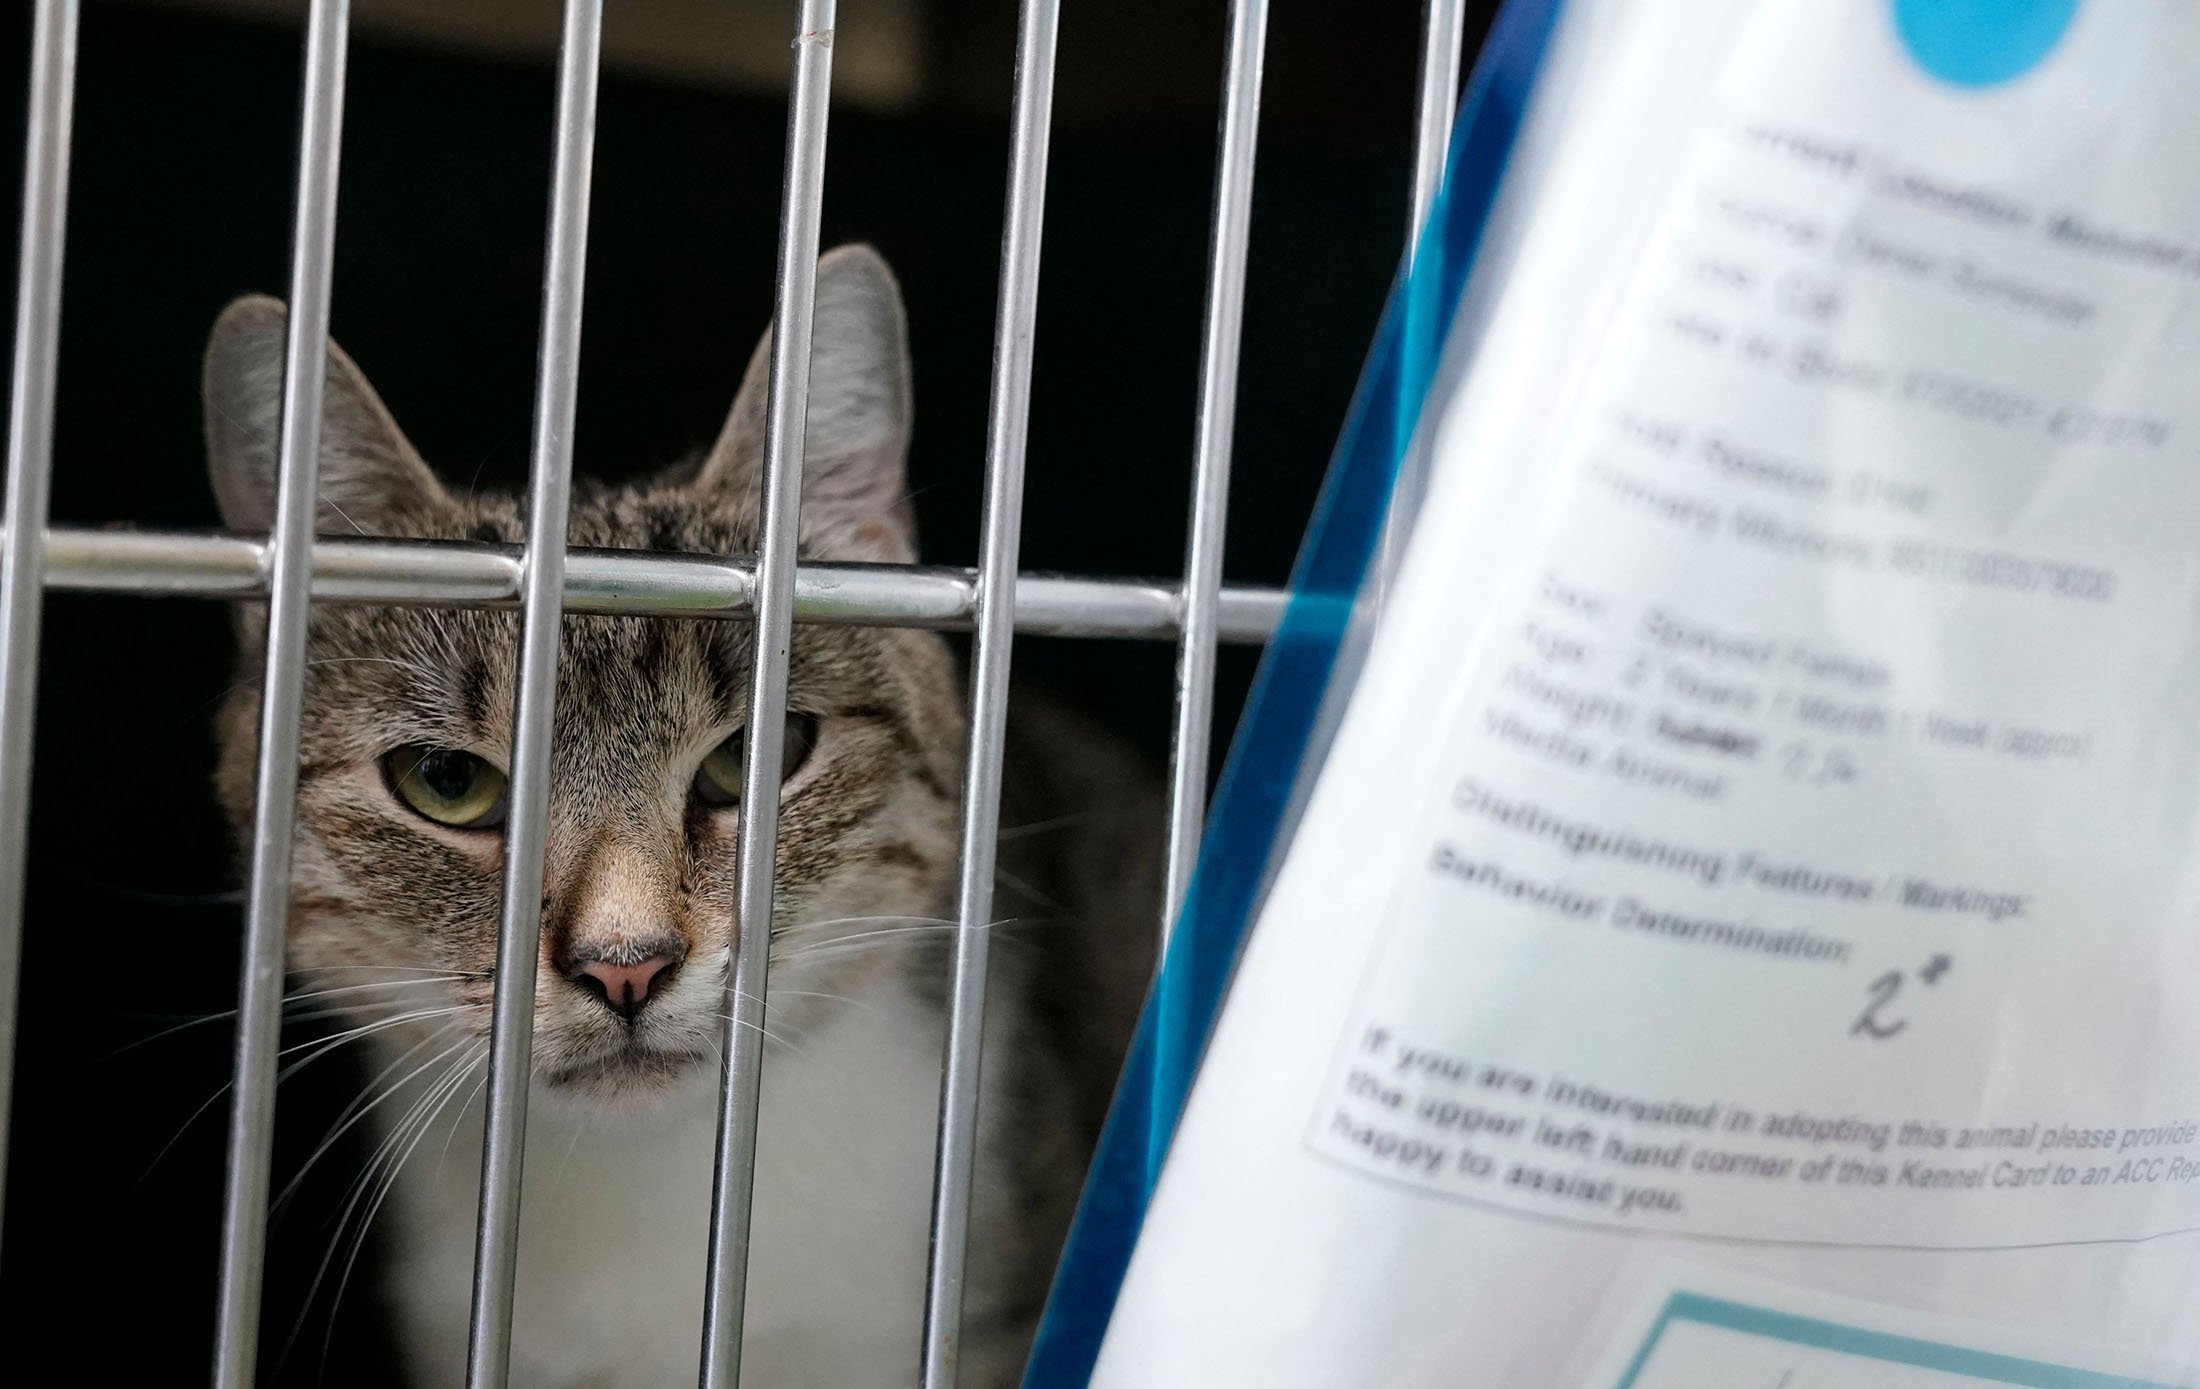 A cat is kenneled at the Animal Care Center of New York, U.S., June 25, 2021. (AFP Photo)